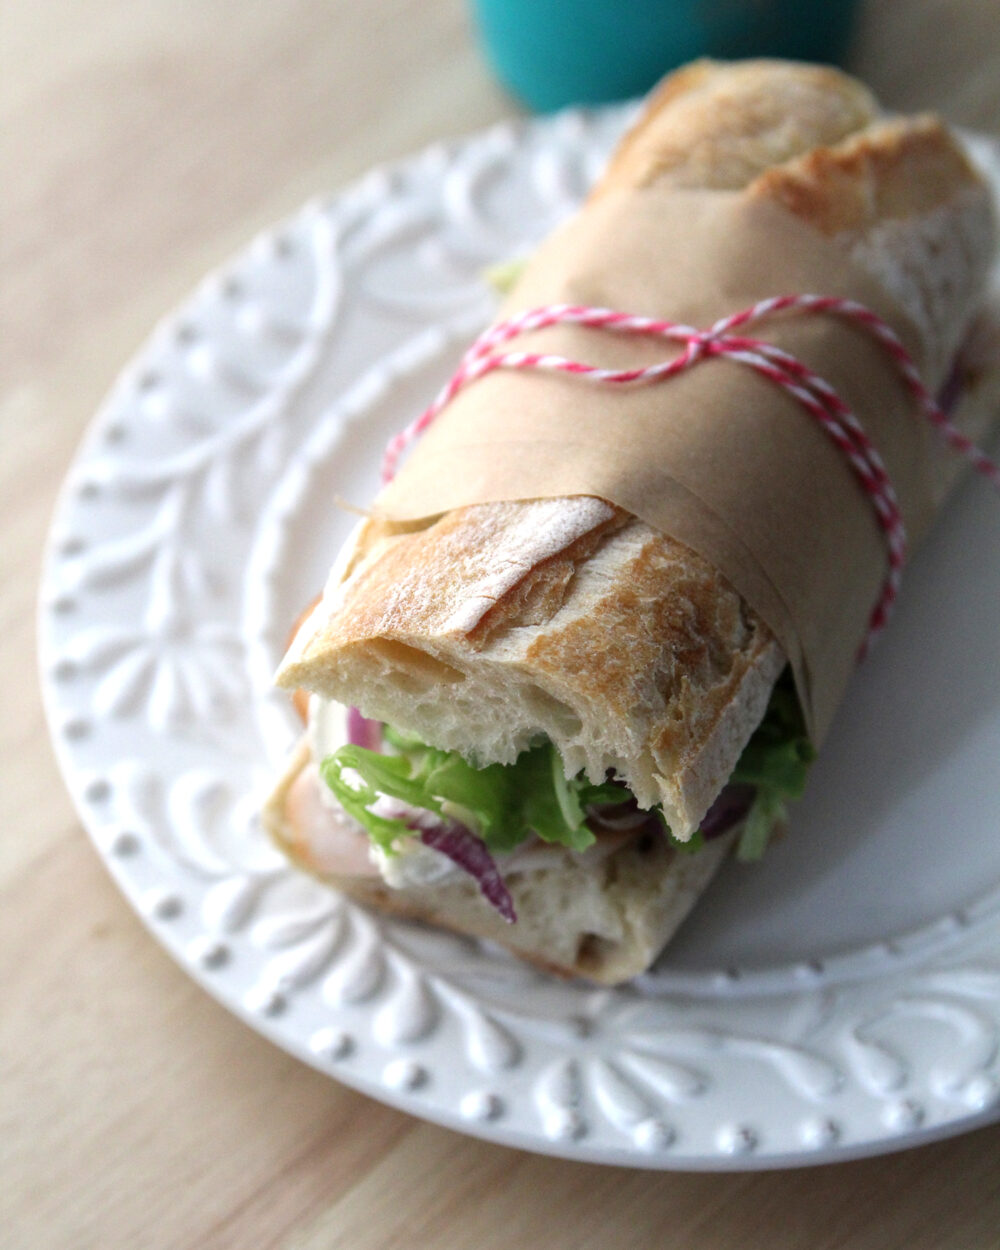 A sandwich on a baguette is shown with visible green lettuce, red onion and a bit of brie. It's sitting on a white plate and is wrapped in brown parchment paper with pink and white bakery string.